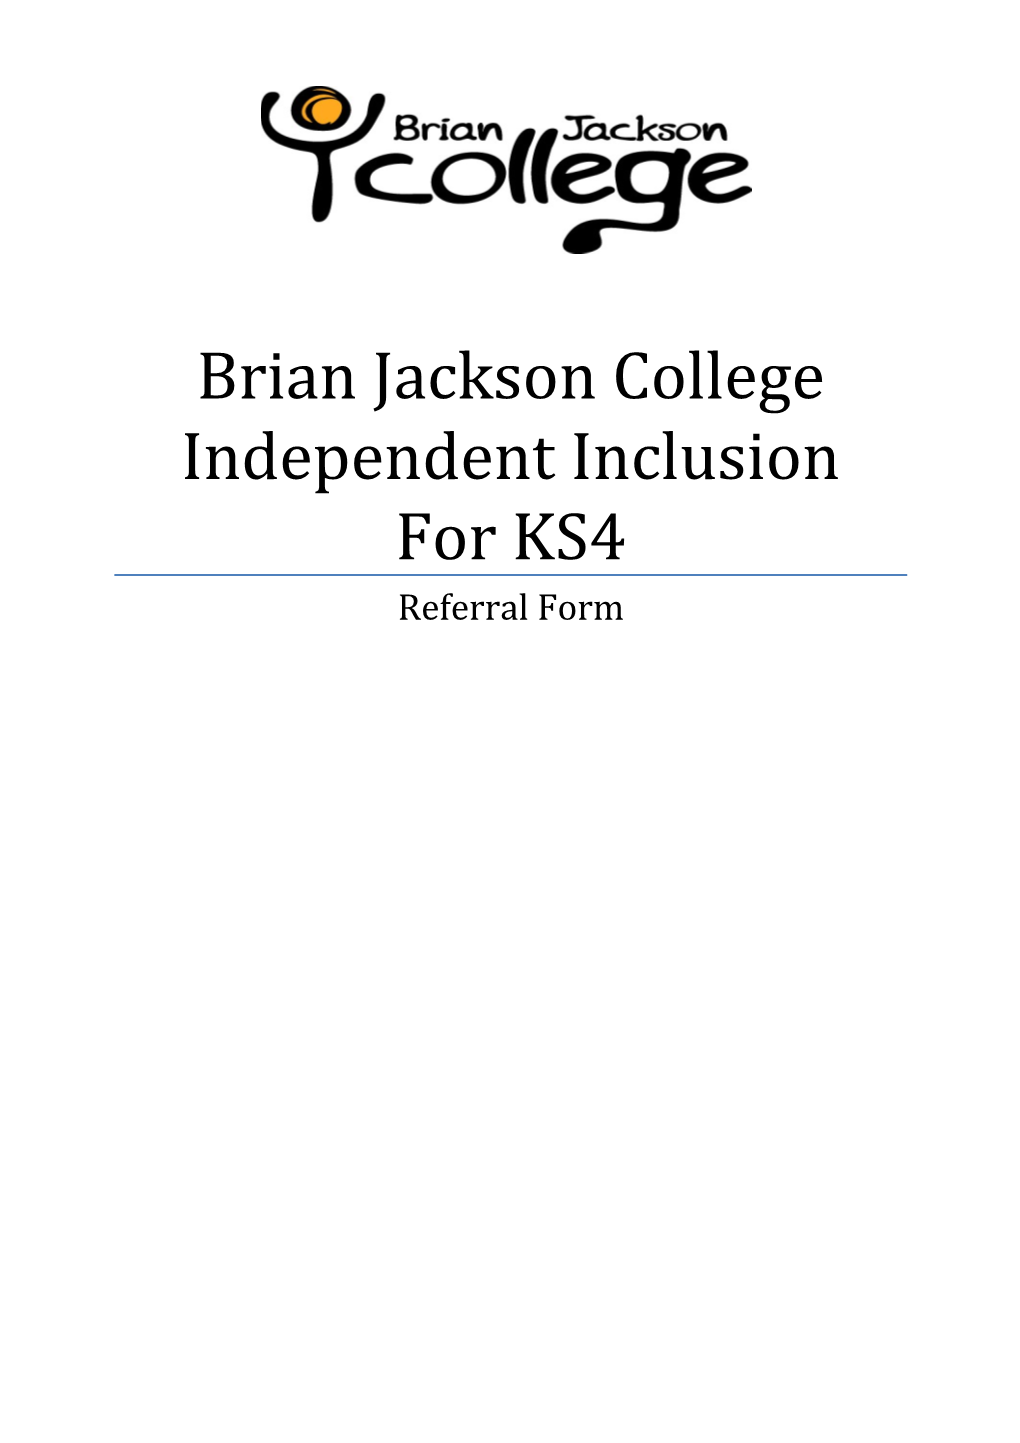 Brian Jackson College Independent Inclusion for KS4